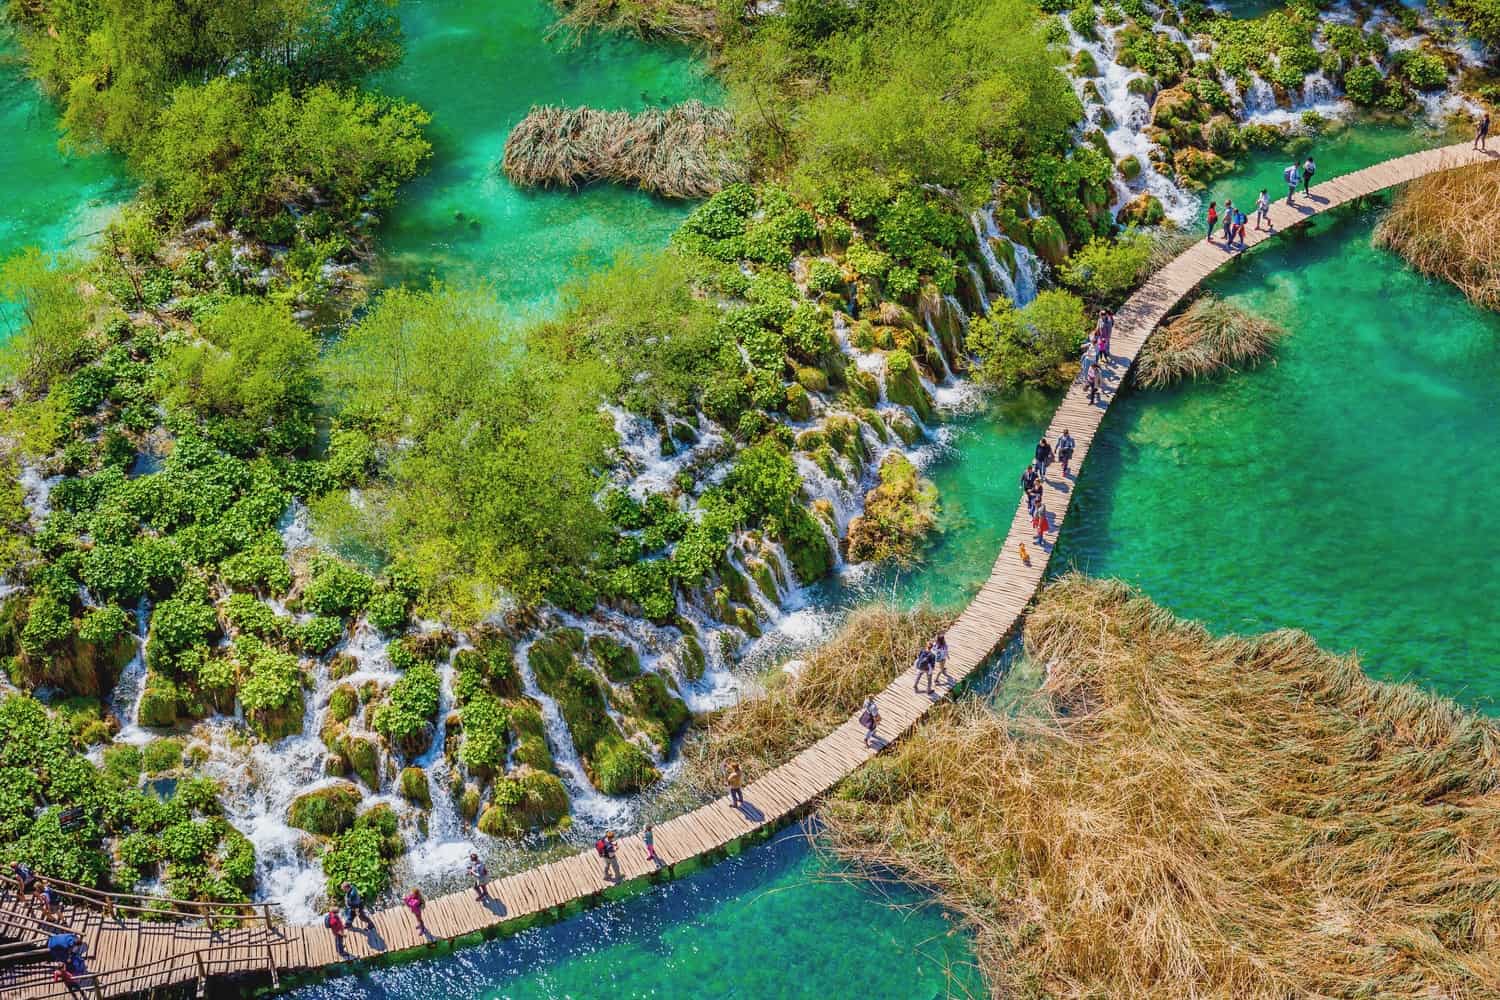 Plitvice Lakes from above with people on the walkway